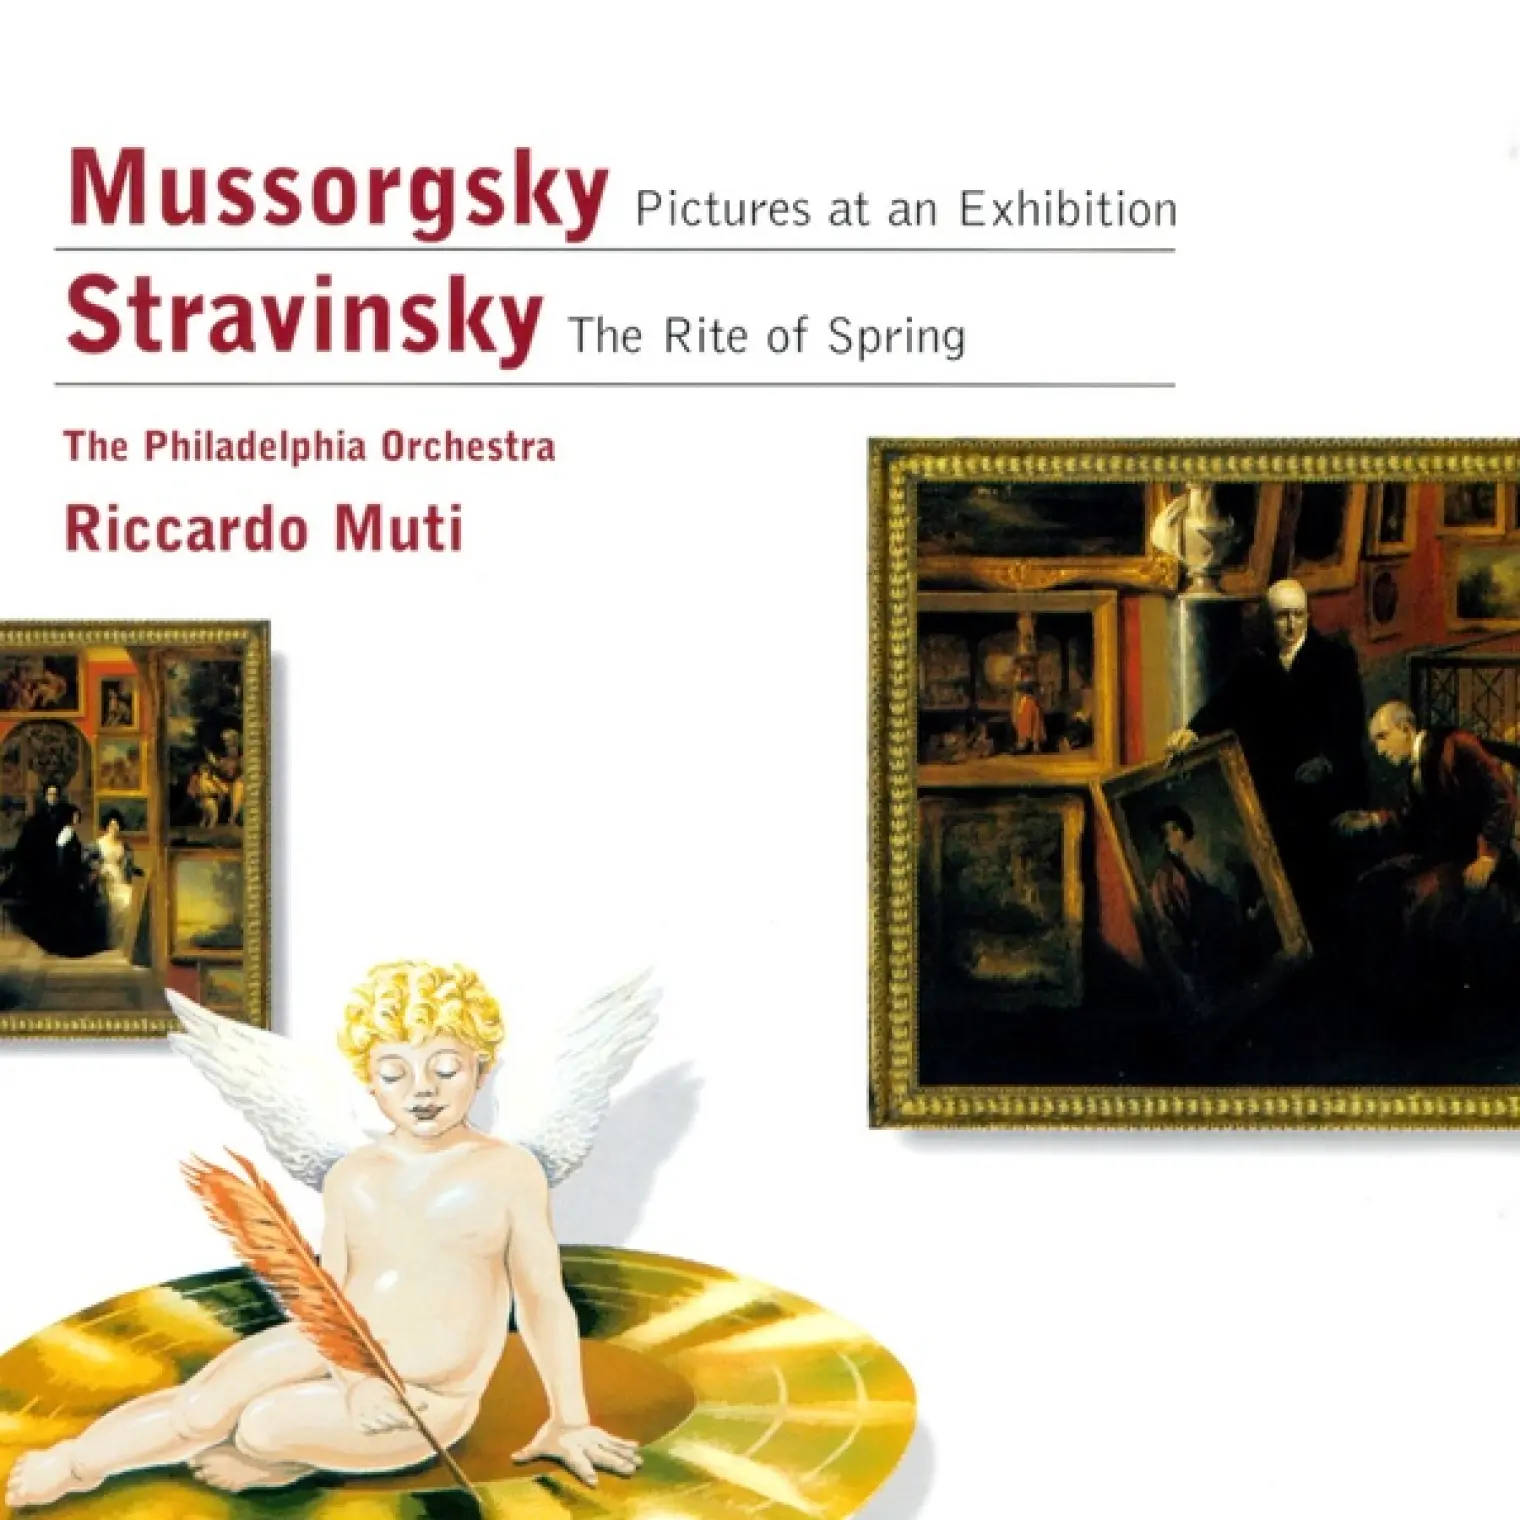 Mussorgsky: Pictures at an Exhibition - Stravinsky: The Rite of Spring -  Philadelphia Orchestra 